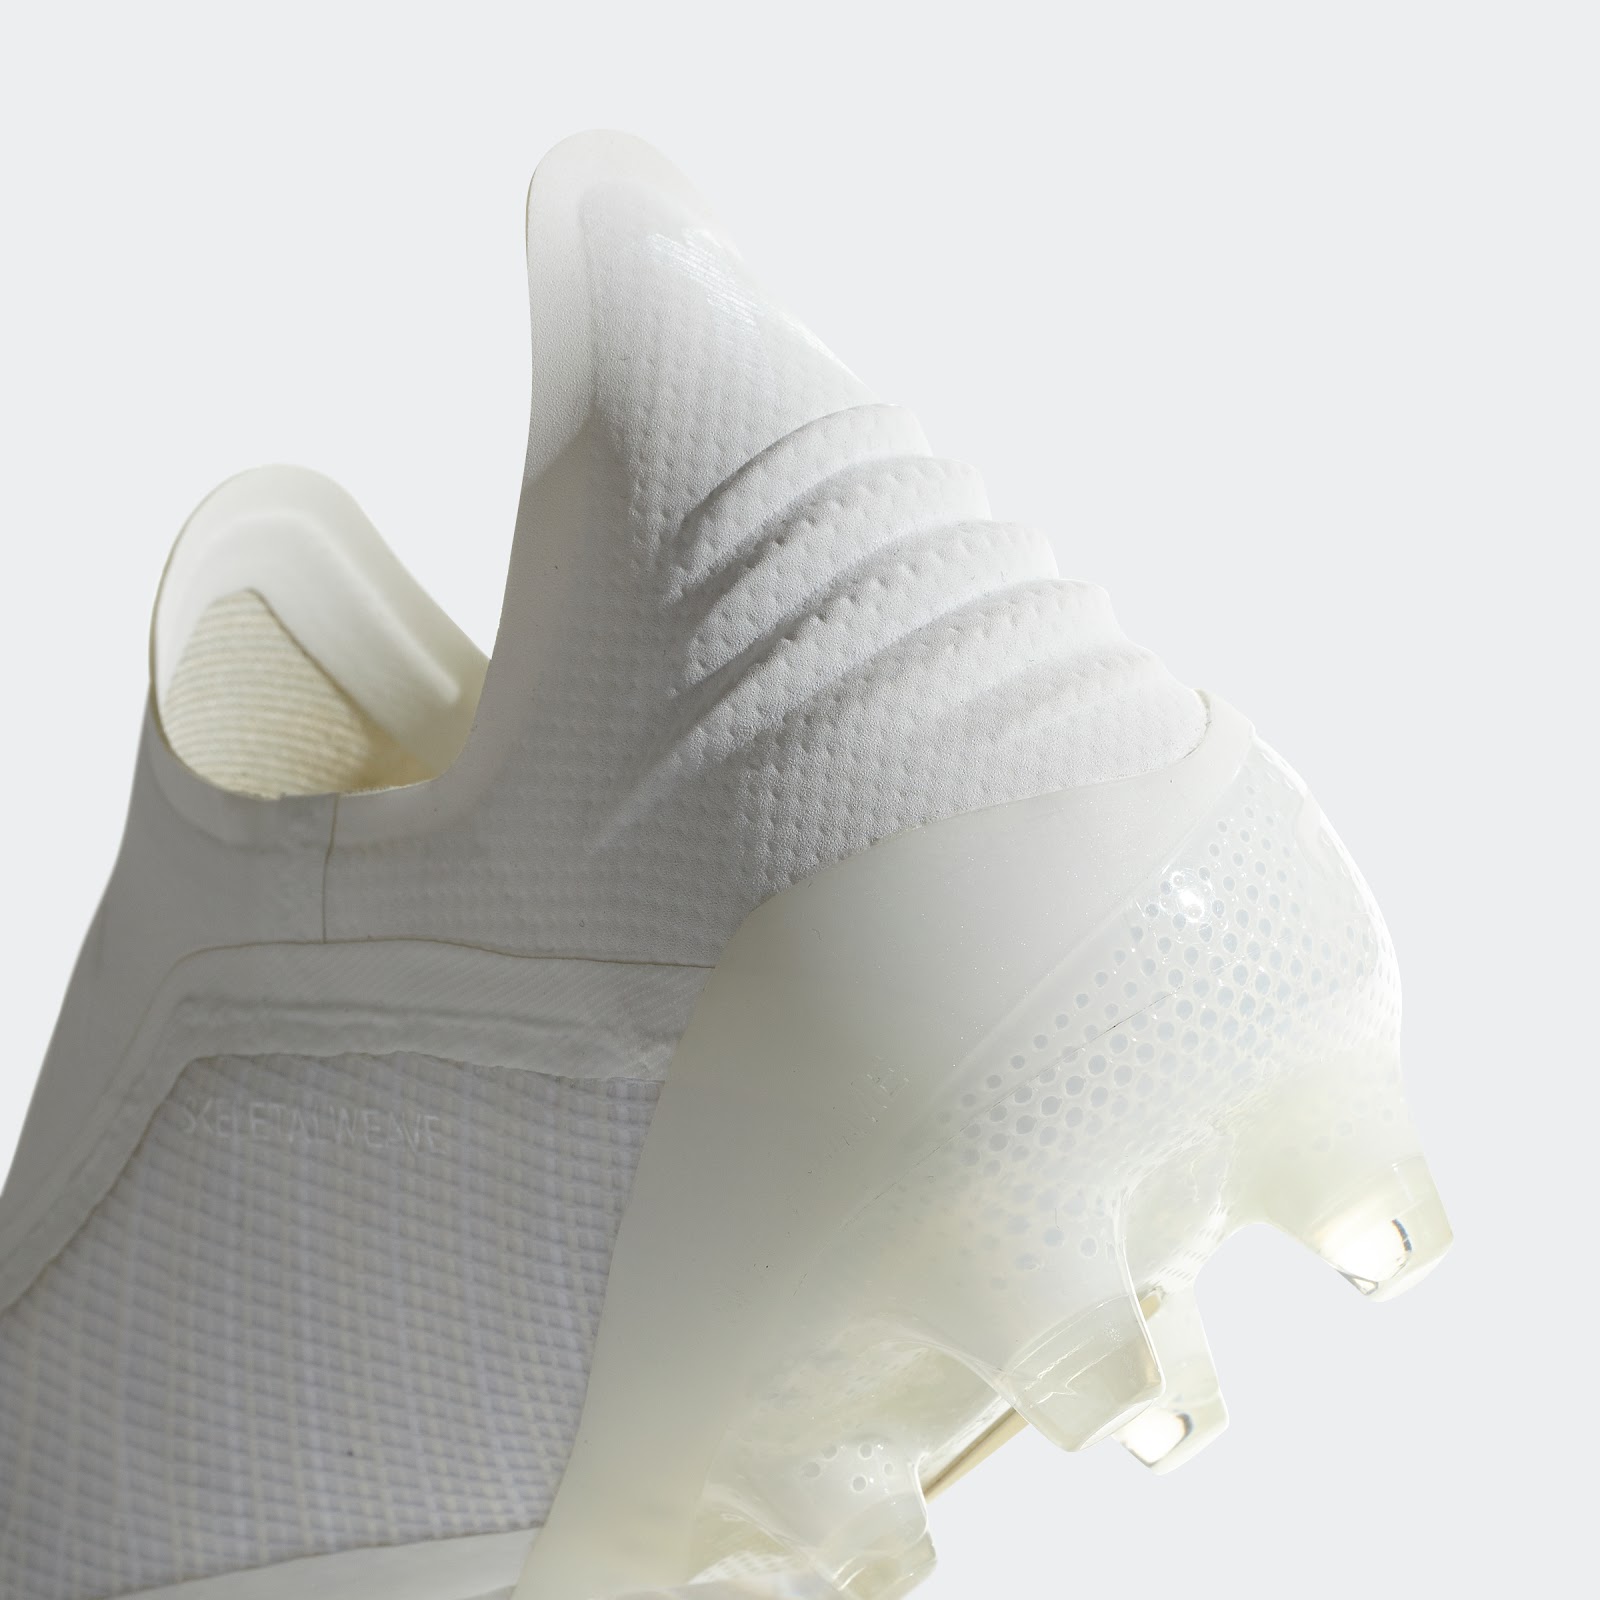 Anuncio masculino Romper Whiteout Adidas X 18+ 'Spectral Mode' Boots Released - Footy Headlines